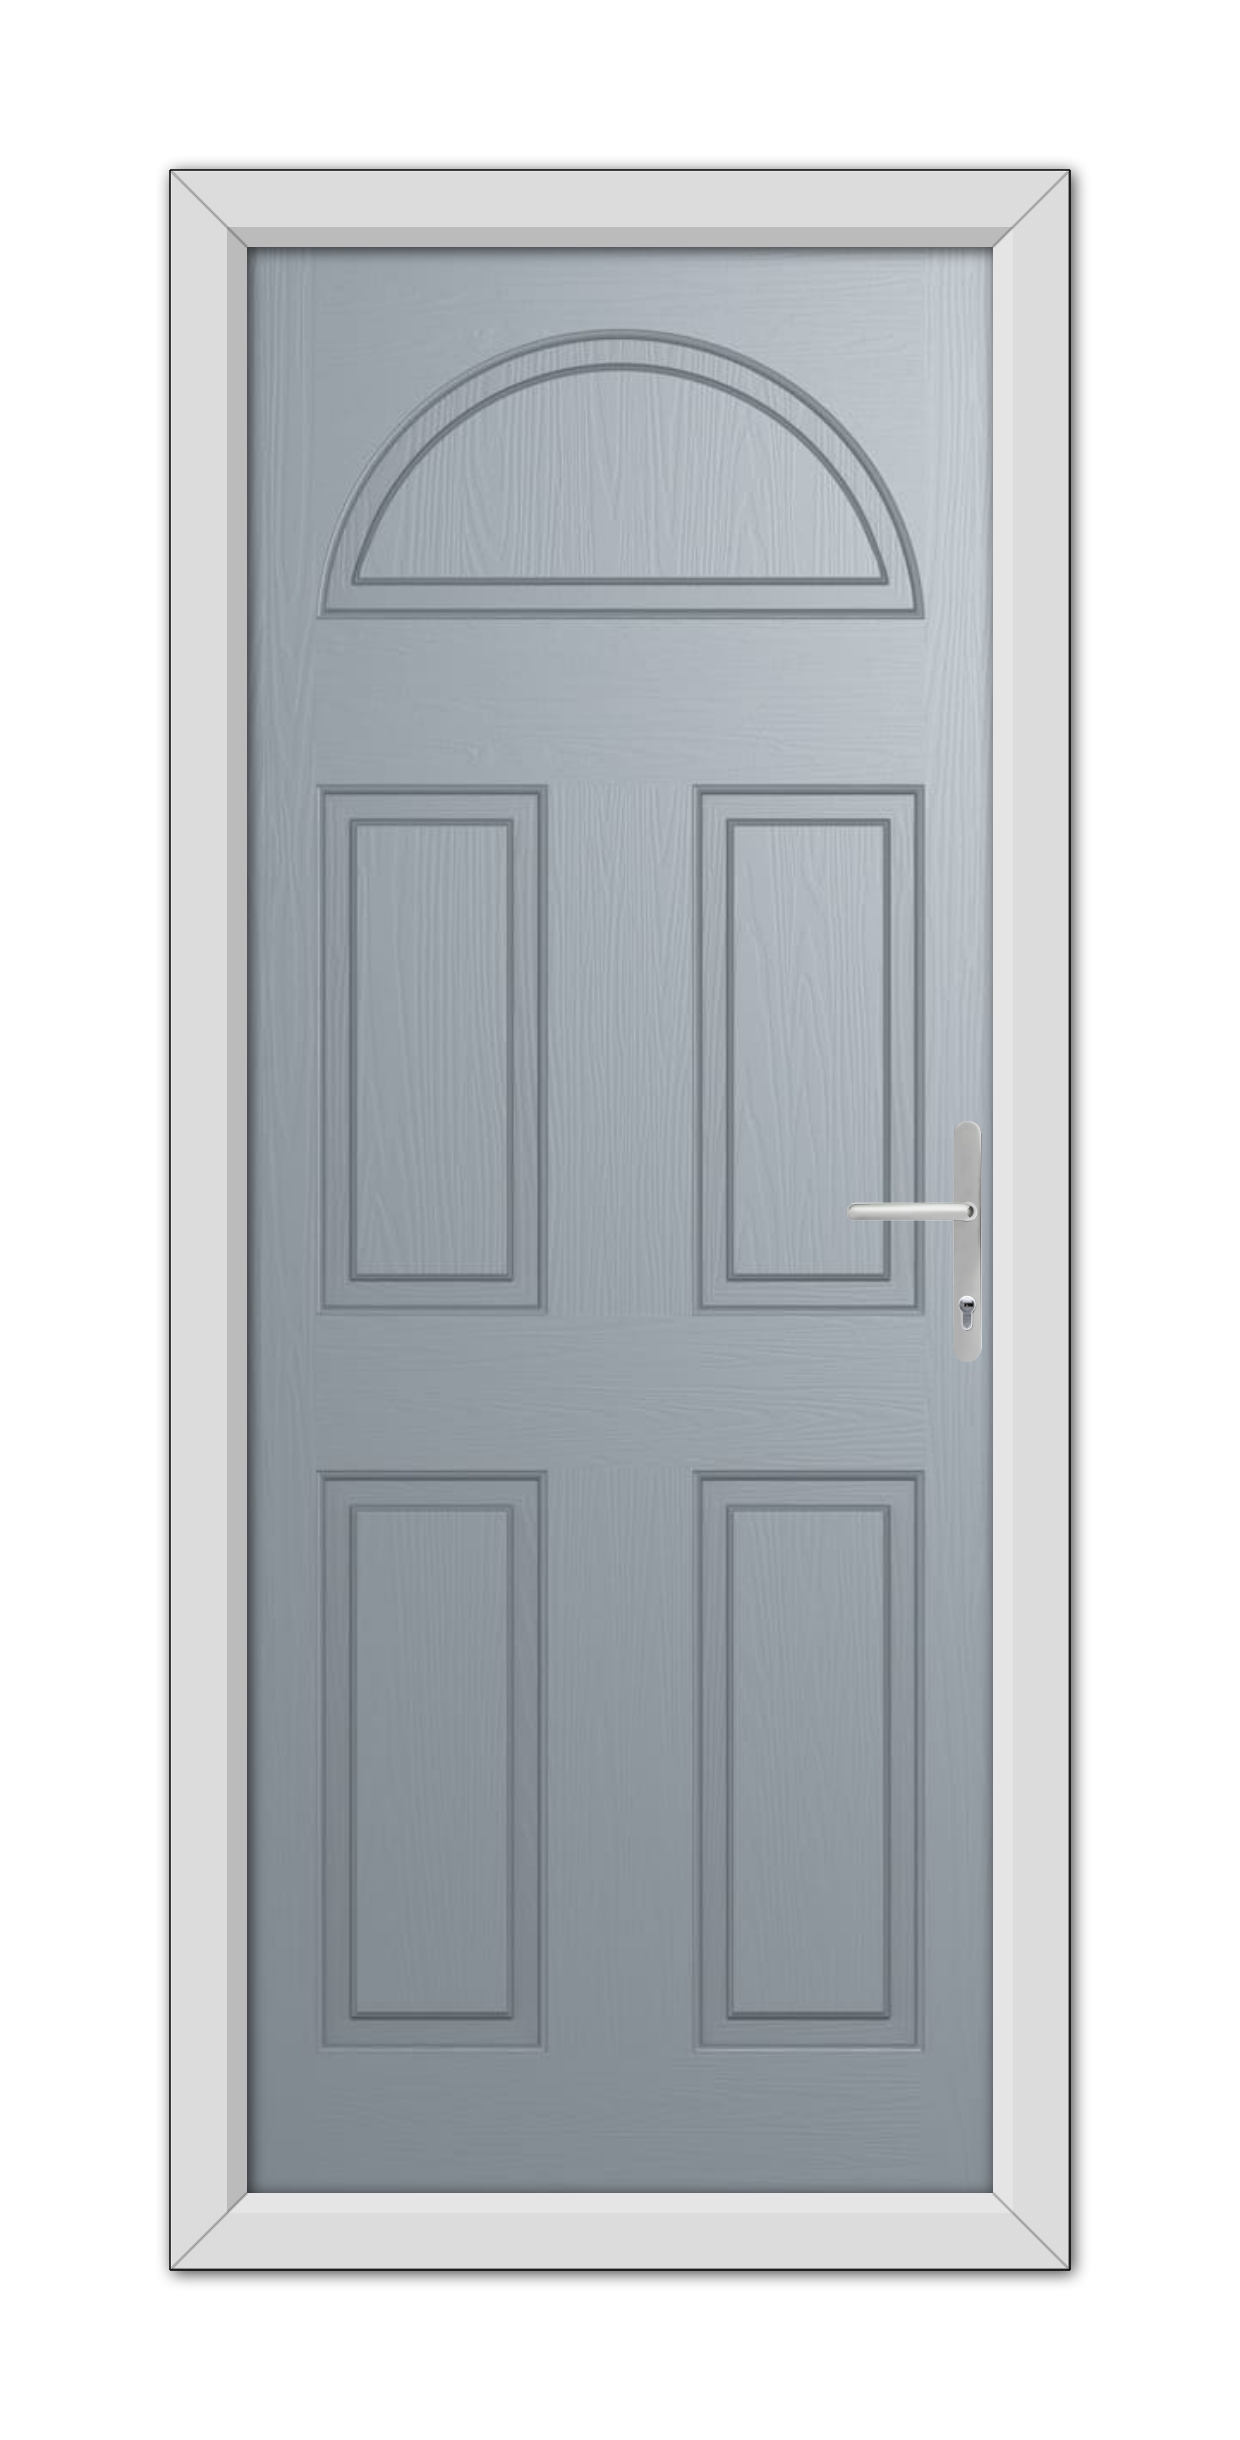 A French Grey Winslow Solid Composite Door 48mm Timber Core with six panels and a semi-circular window at the top, framed in white, with a metallic handle on the right.